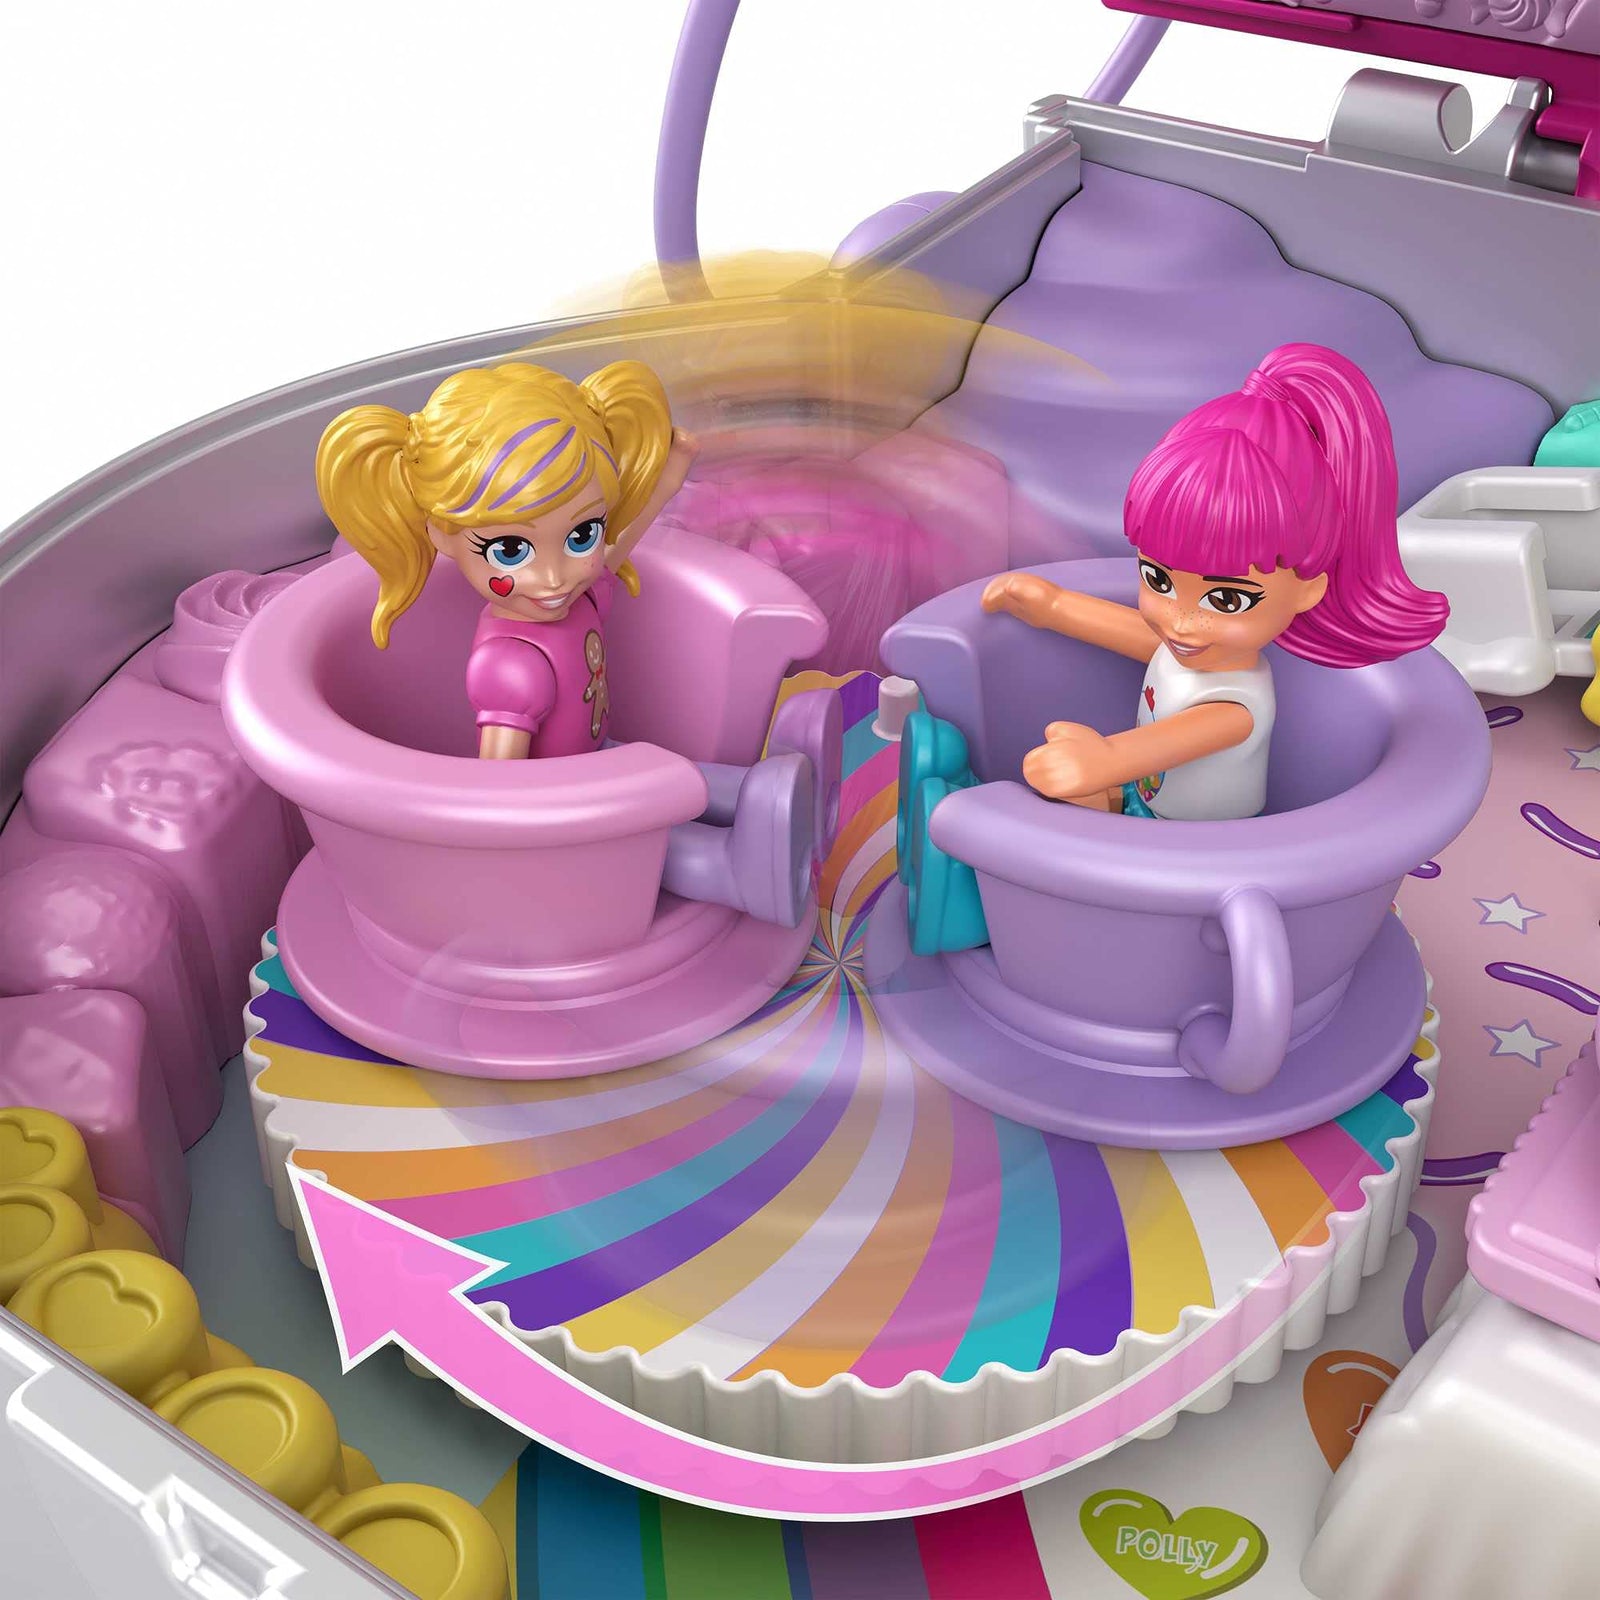 Polly Pocket Candy Cutie Gumball Compact, Gumball Theme with Micro Polly & Margot Dolls, 5 Reveals & 13 Related Accessories, Pop & Swap Feature, Great Gift for Ages 4 Years Old & Up